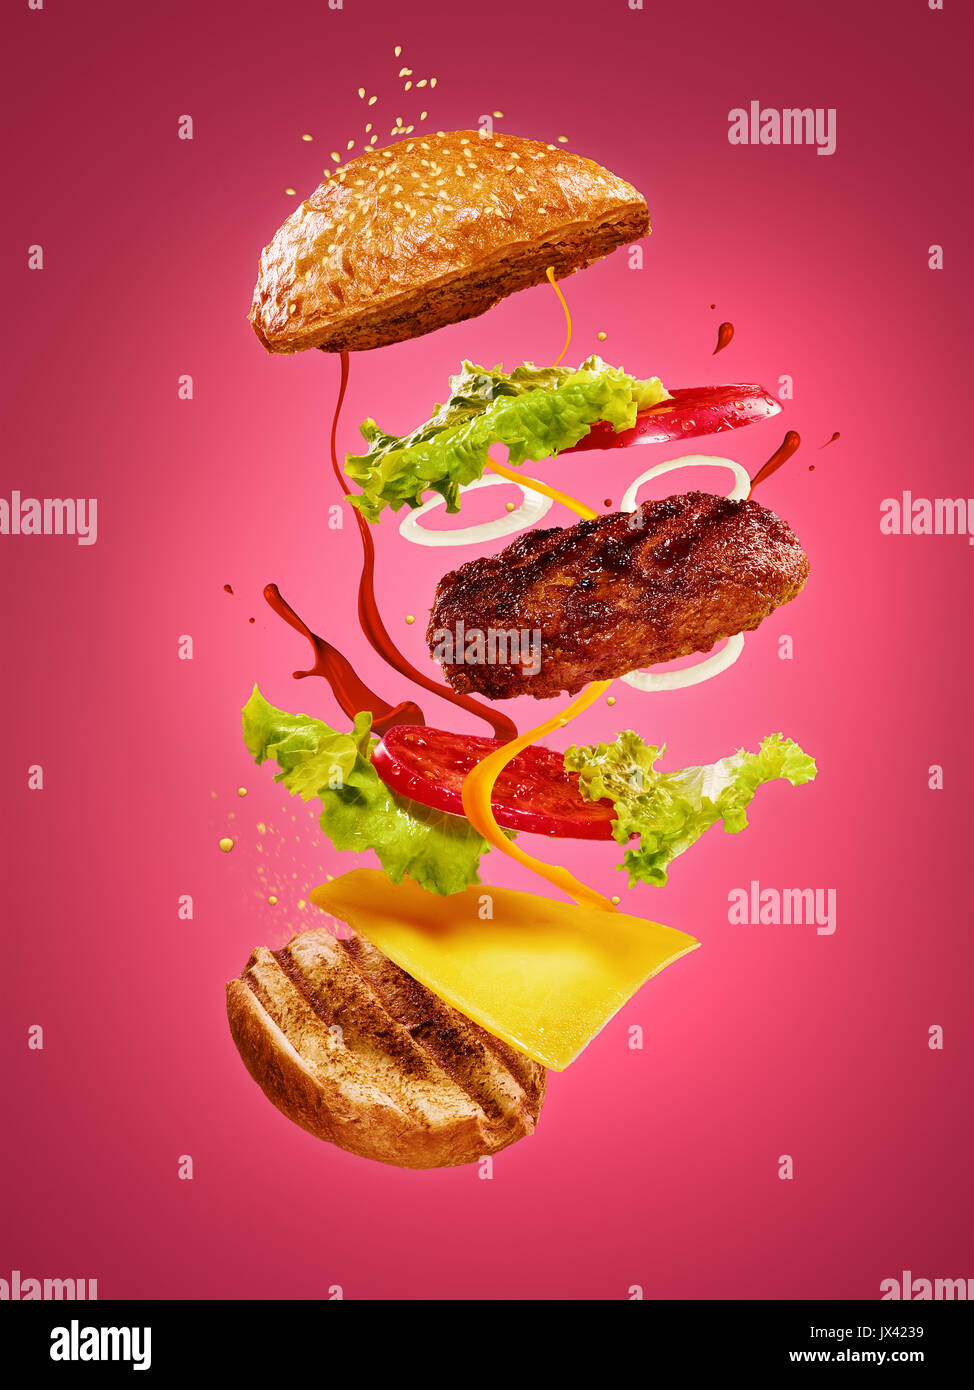 The hamburger with flying ingredients on rose background Stock Photo